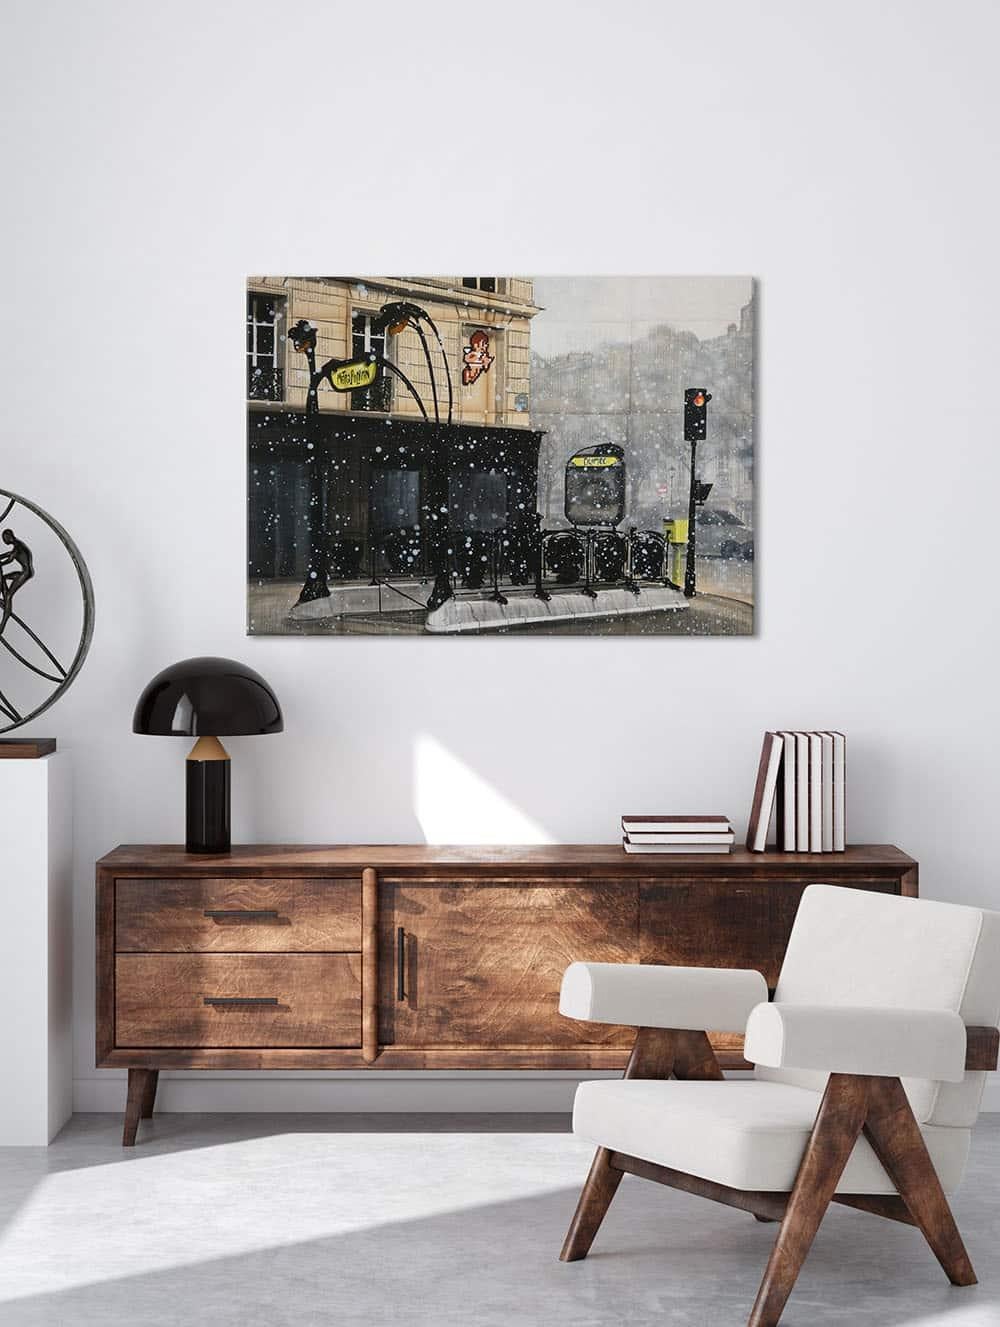 Angel by Guillaume Chansarel - Urban landscape painting, Paris - Contemporary Painting by Guillaume Chansarel (Guiyome)